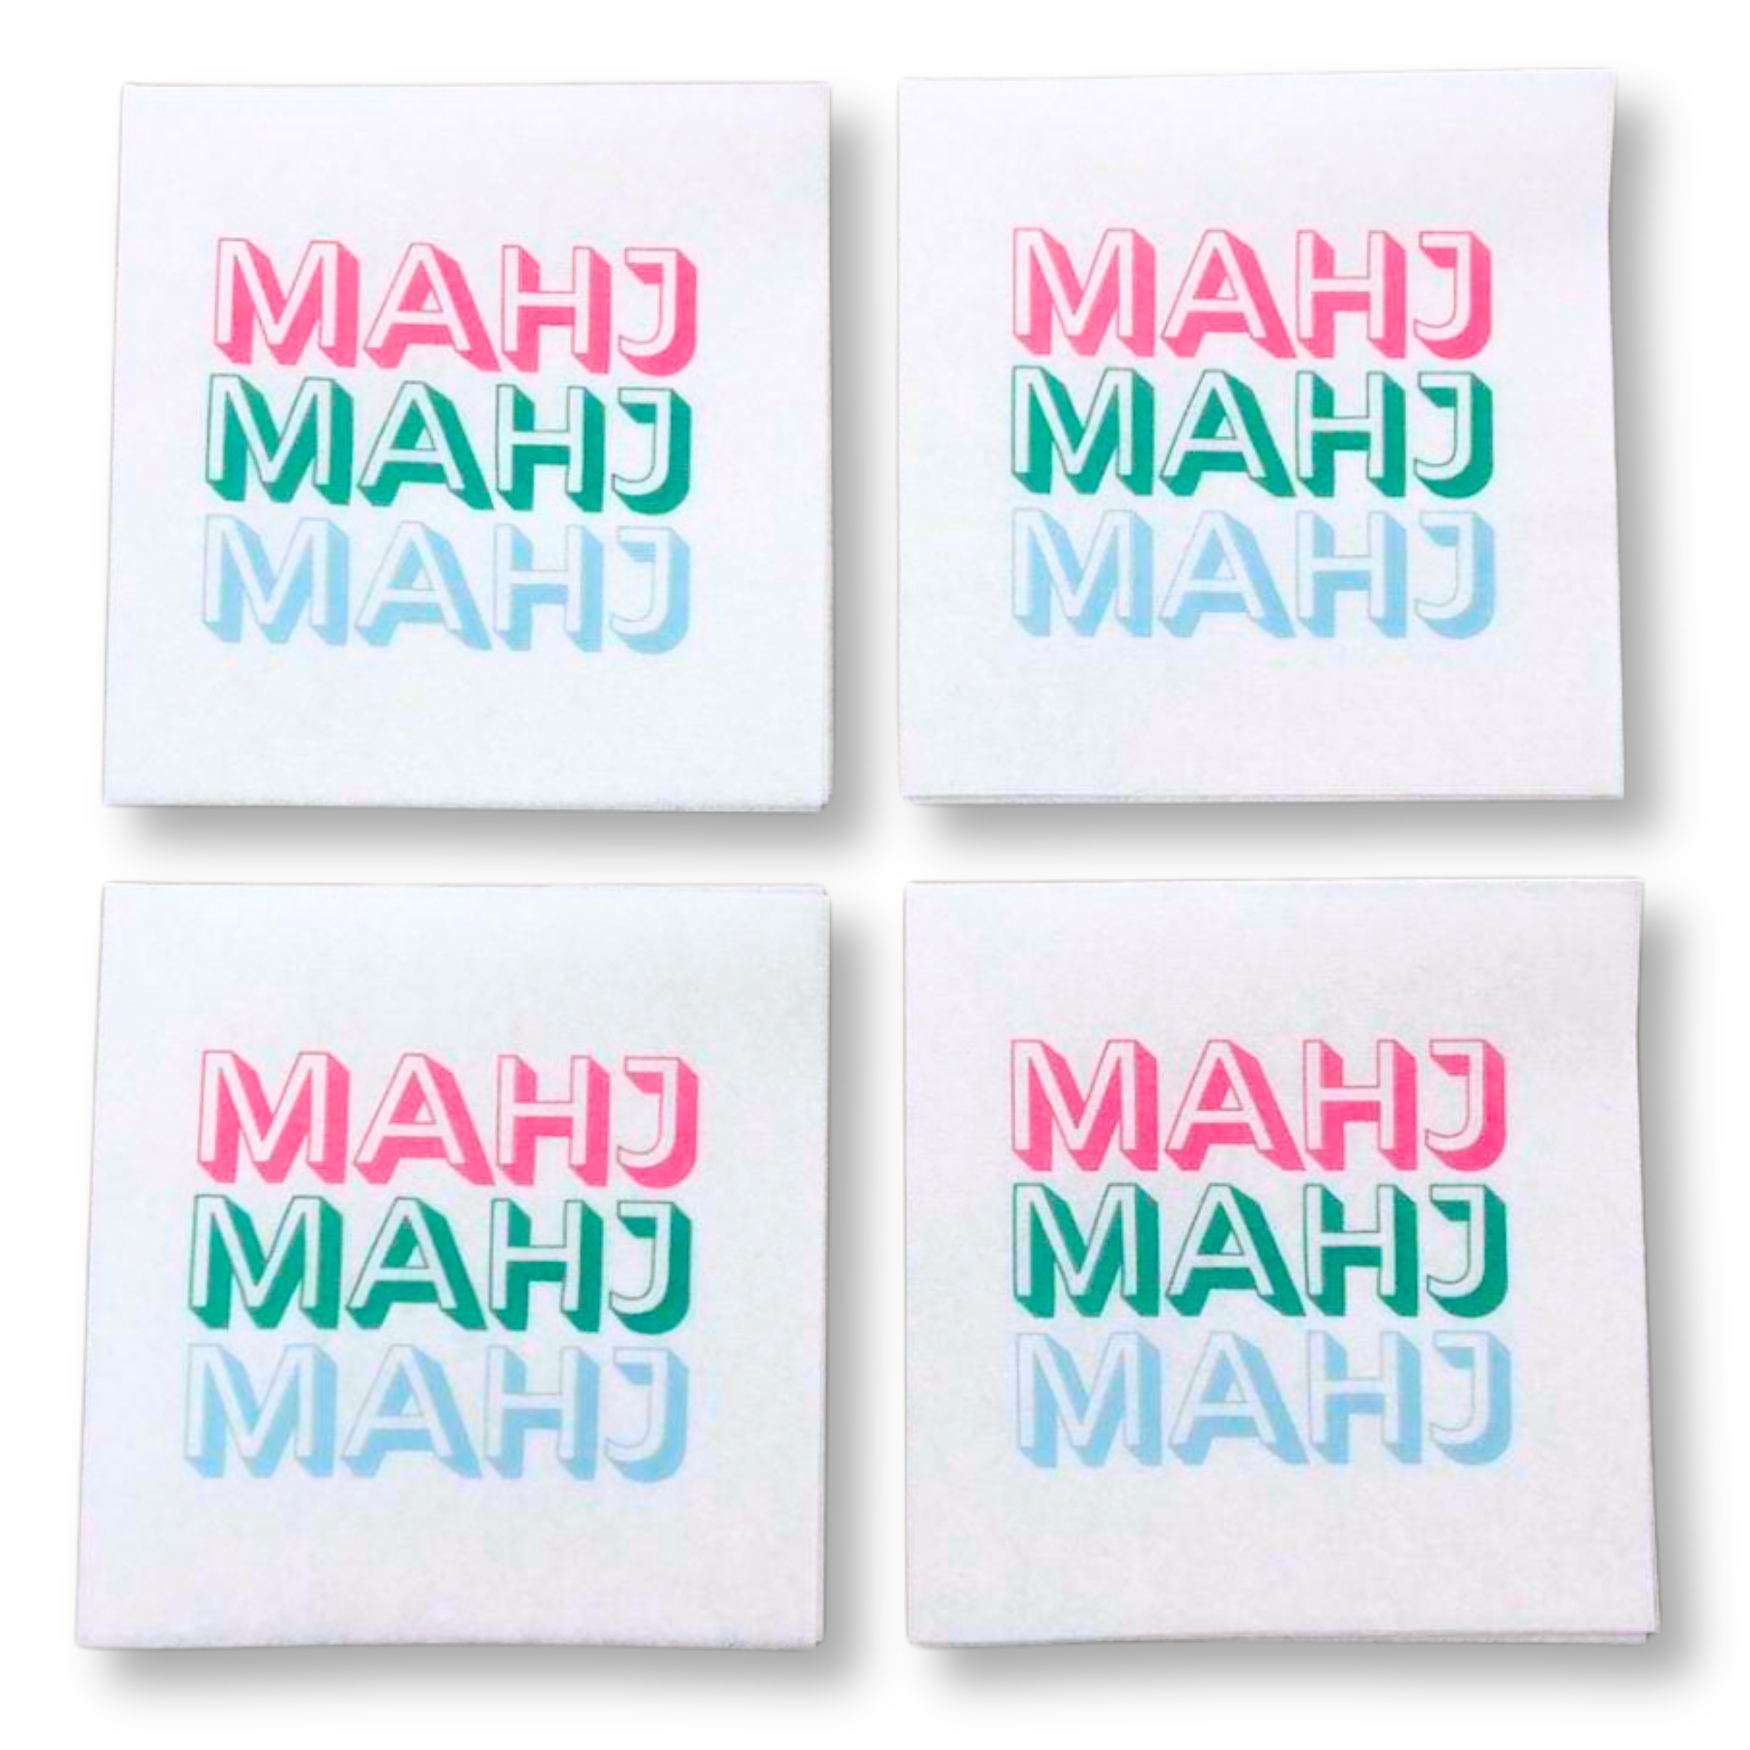 Colorful Unique Mahjong cocktail napkins- set of 50-  with pink green and blue word Mahj - airlaid technology - luxury eco friendly disposable napkins for Mah Jongg parties tournaments game night or mahjongg gift.